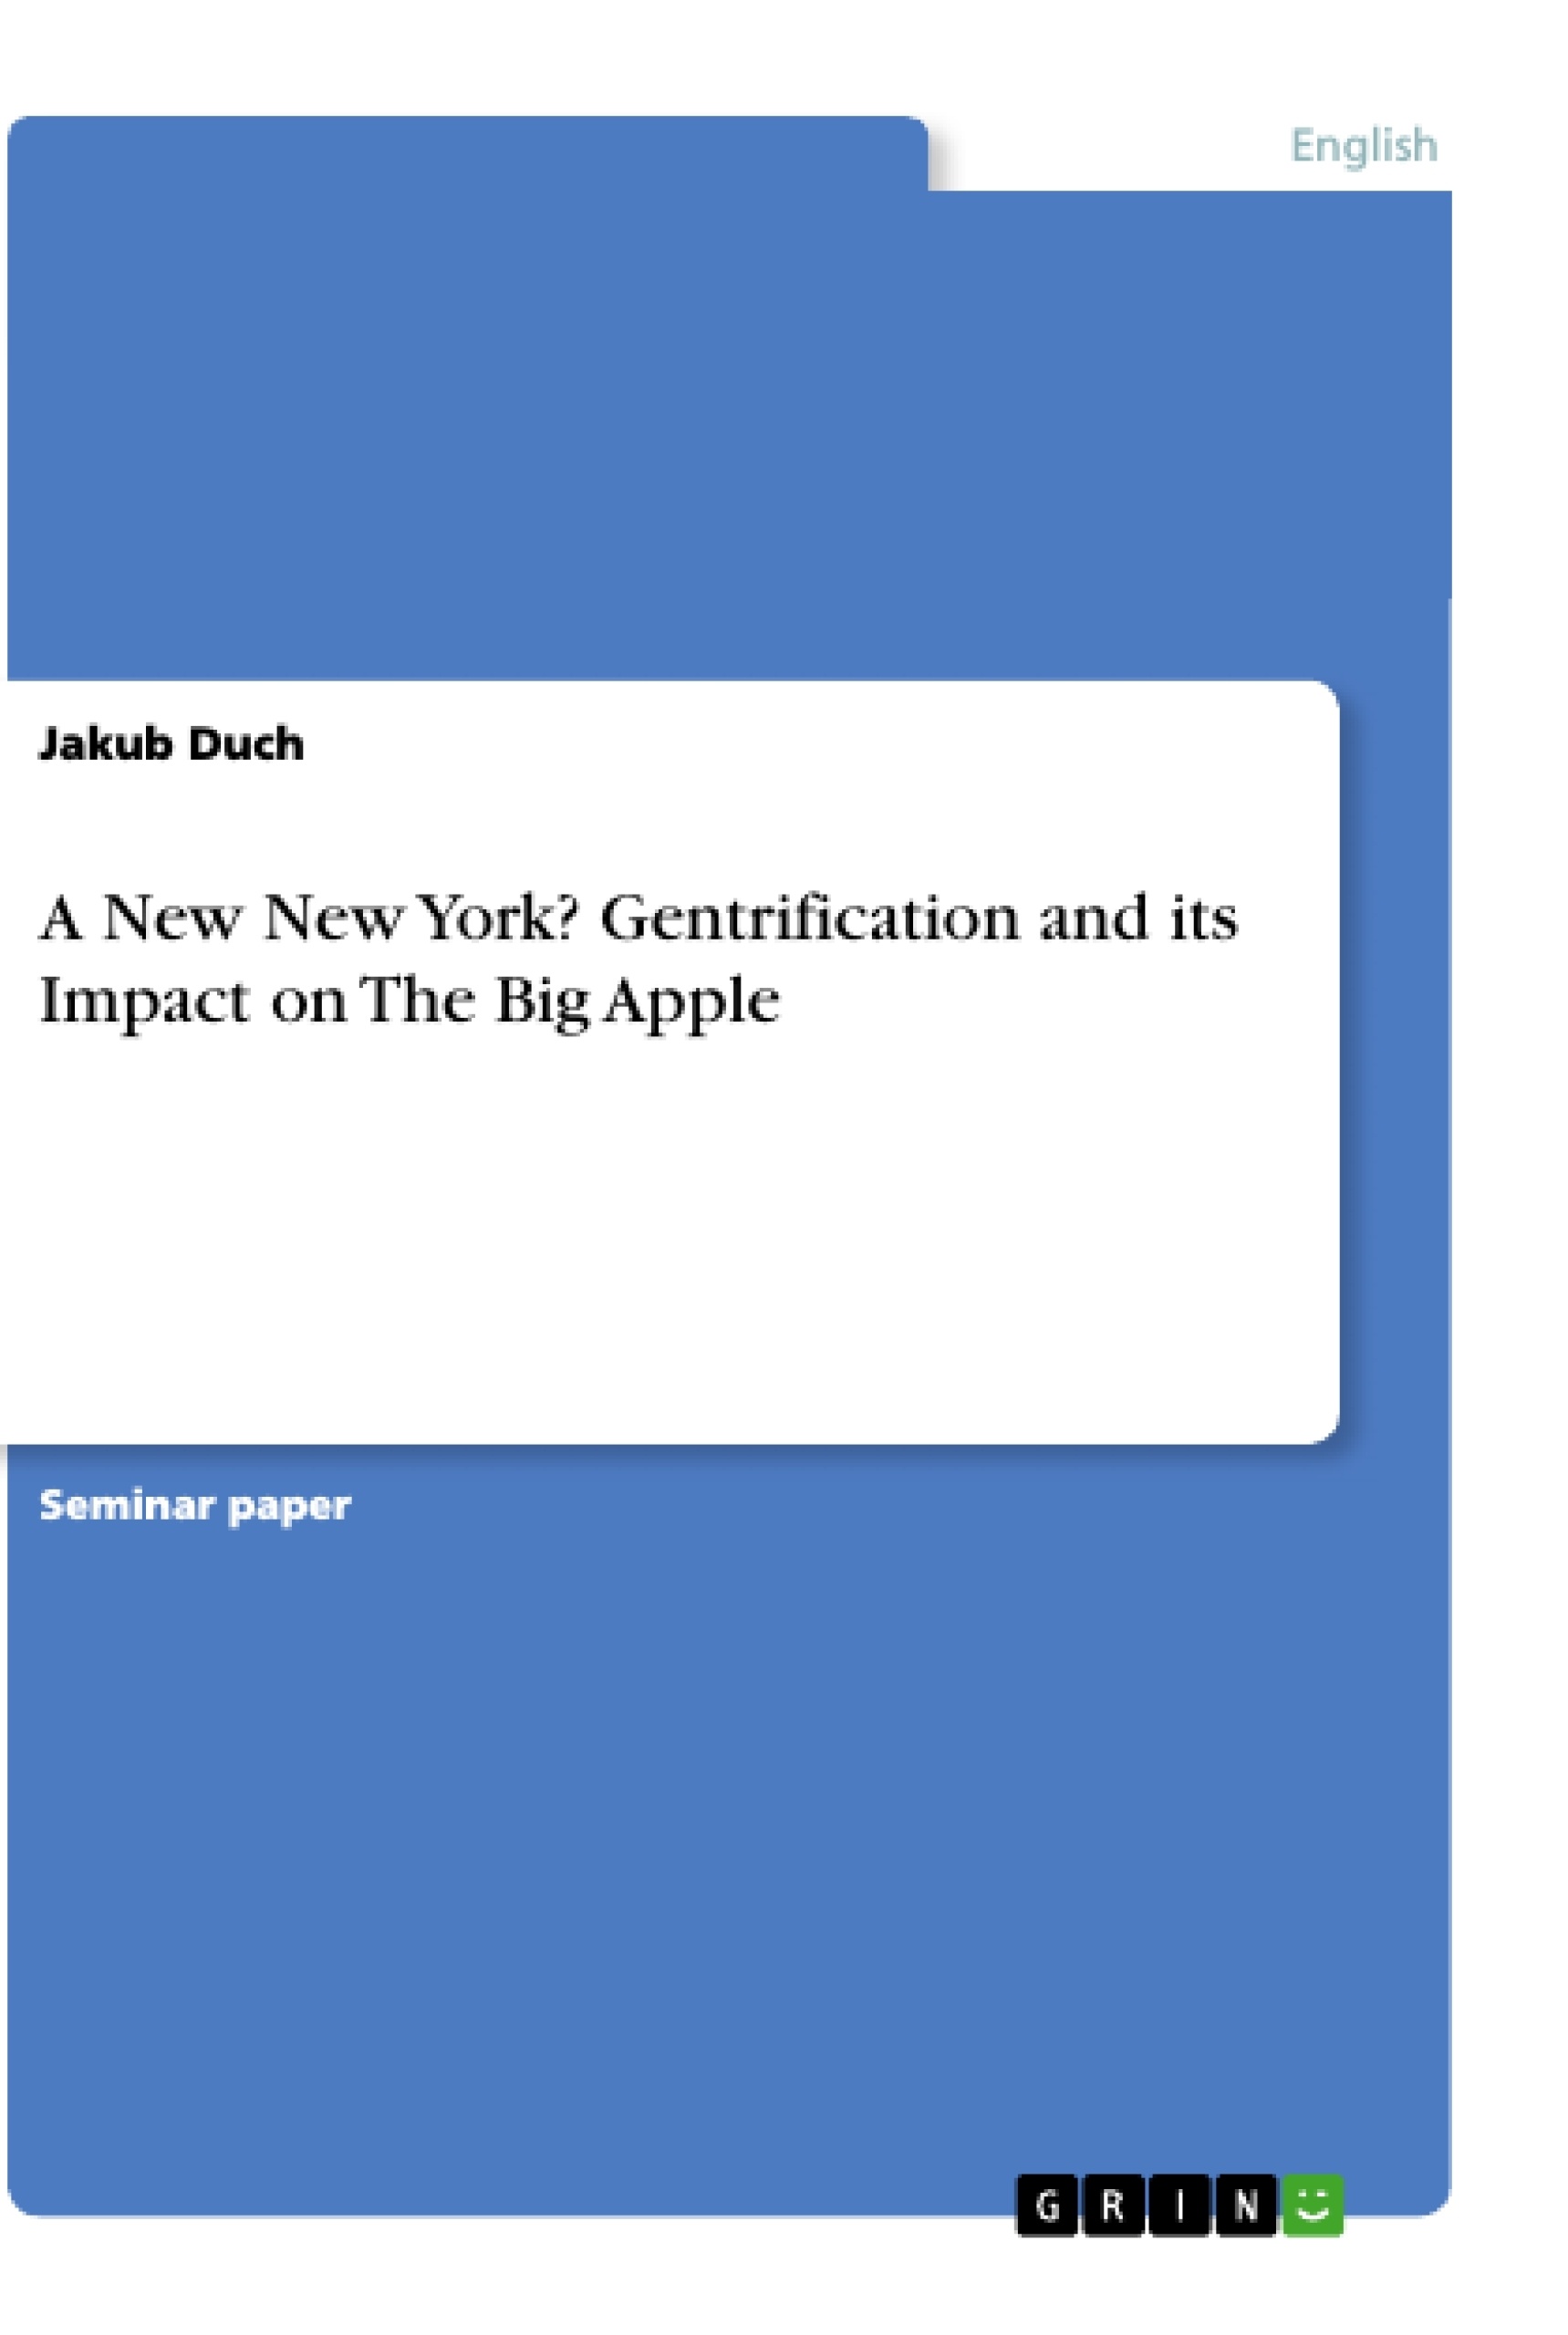 research paper on gentrification